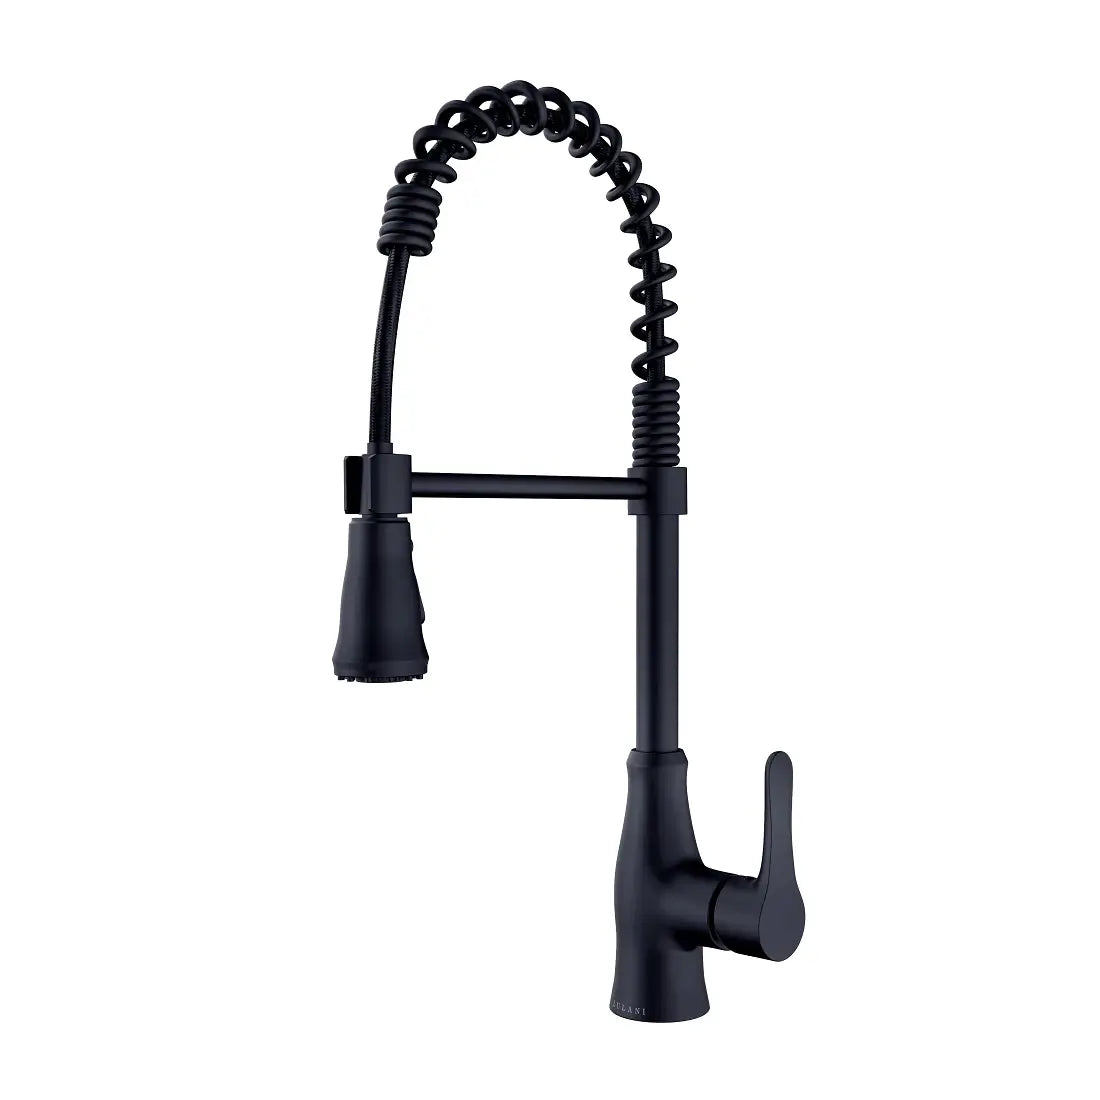 Bora Bora 1 Handle Pull-Down Swivel Kitchen Faucet with Baseplate